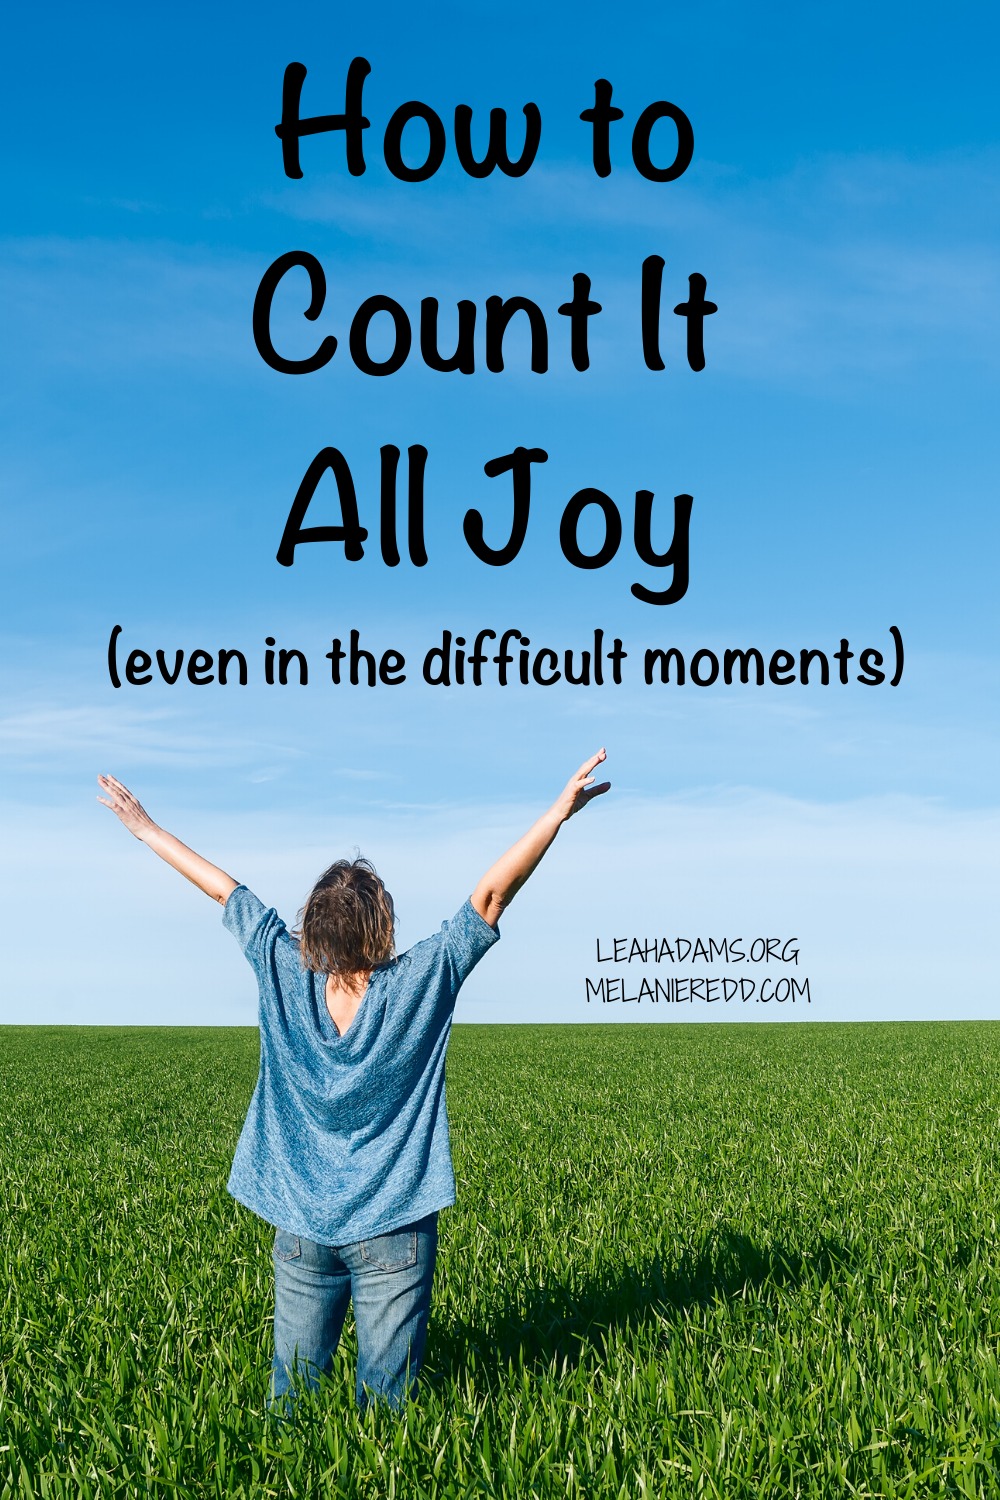 Life is filled with challenging moments, days, weeks, and even seasons. There are days when we are pressed, tugged, and pushed. Honestly, is hard! But, there is hope. There is always hope! Learn how to count it all joy (even in the difficult moments). Drop by the blog today! #hope #countitalljoy #joy #encouragement